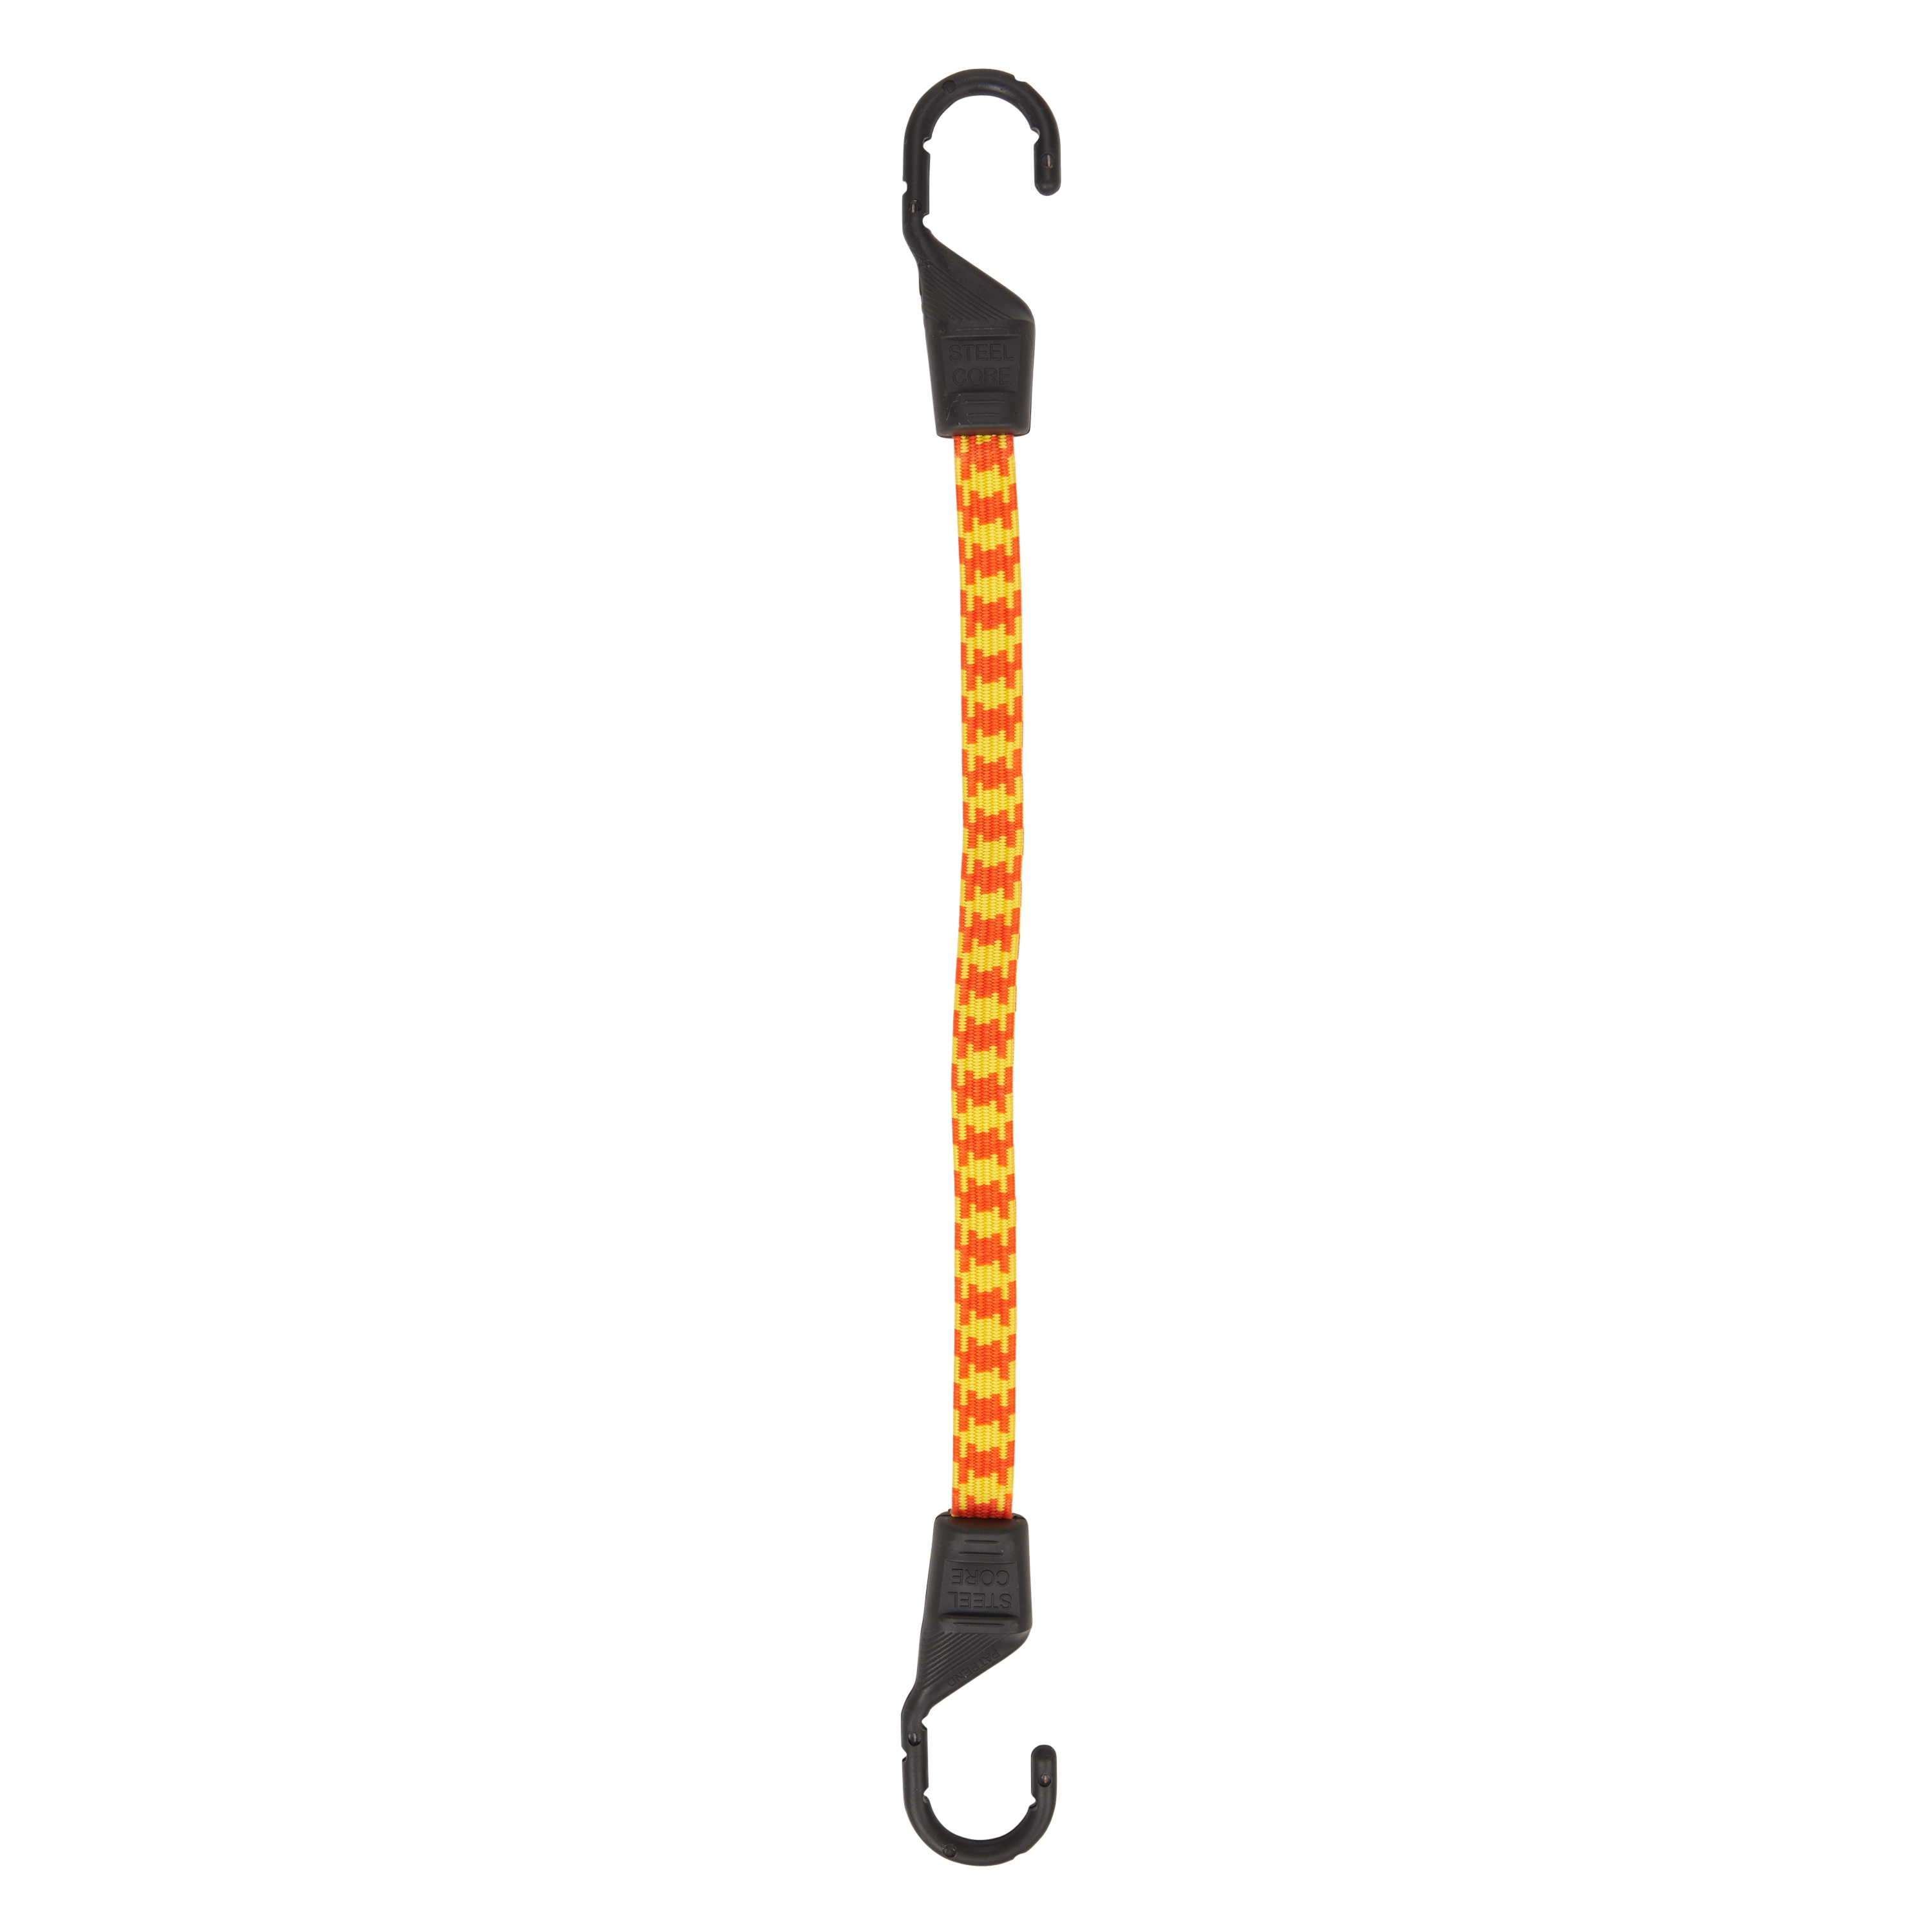 18" Flat Bungee Cord variant image view